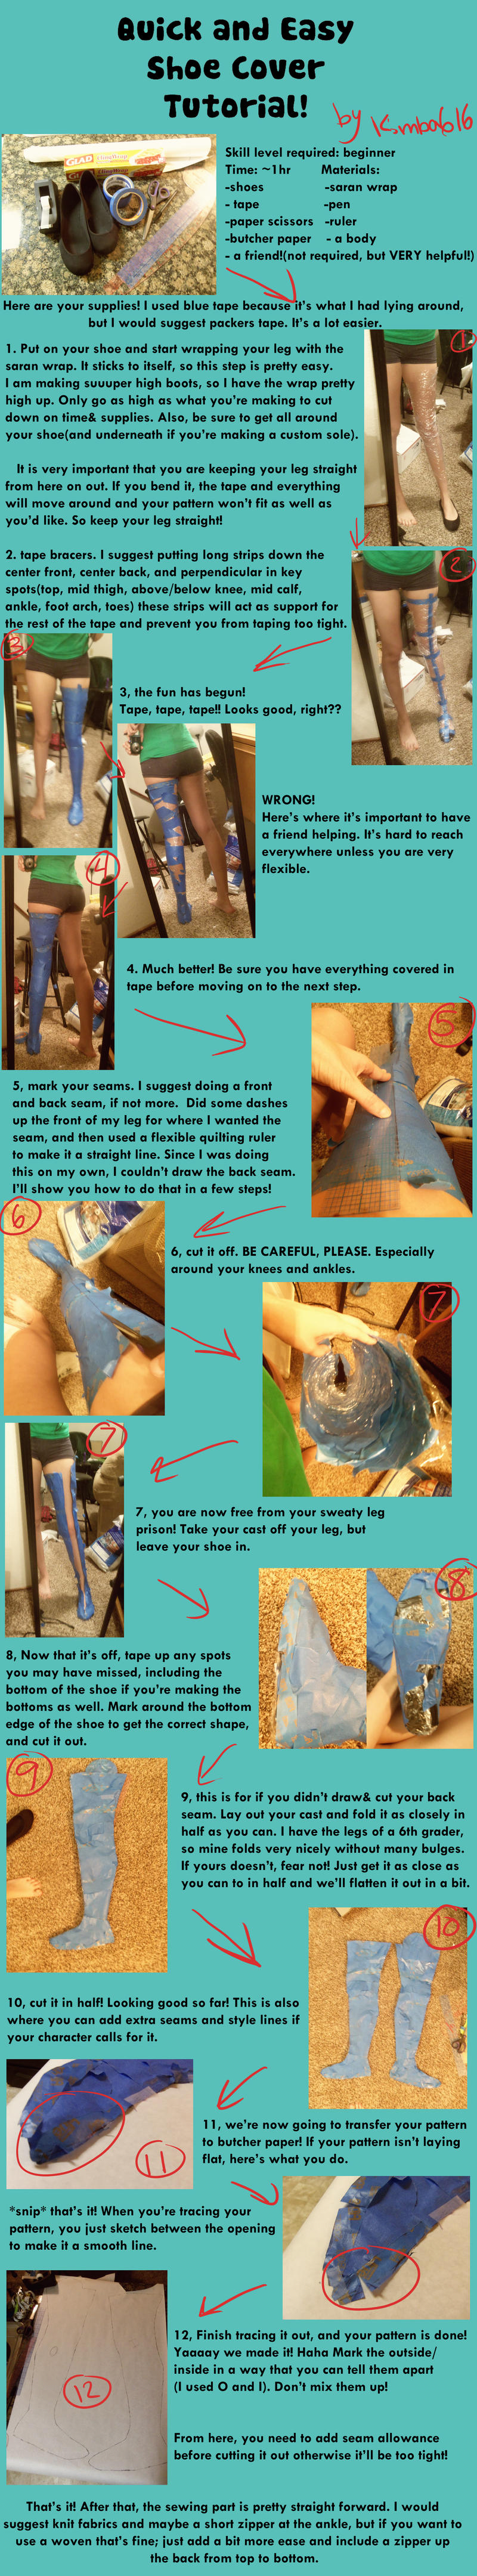 Quick and Easy Cosplay Boot Cover Tutorial by Kimba616 on DeviantArt